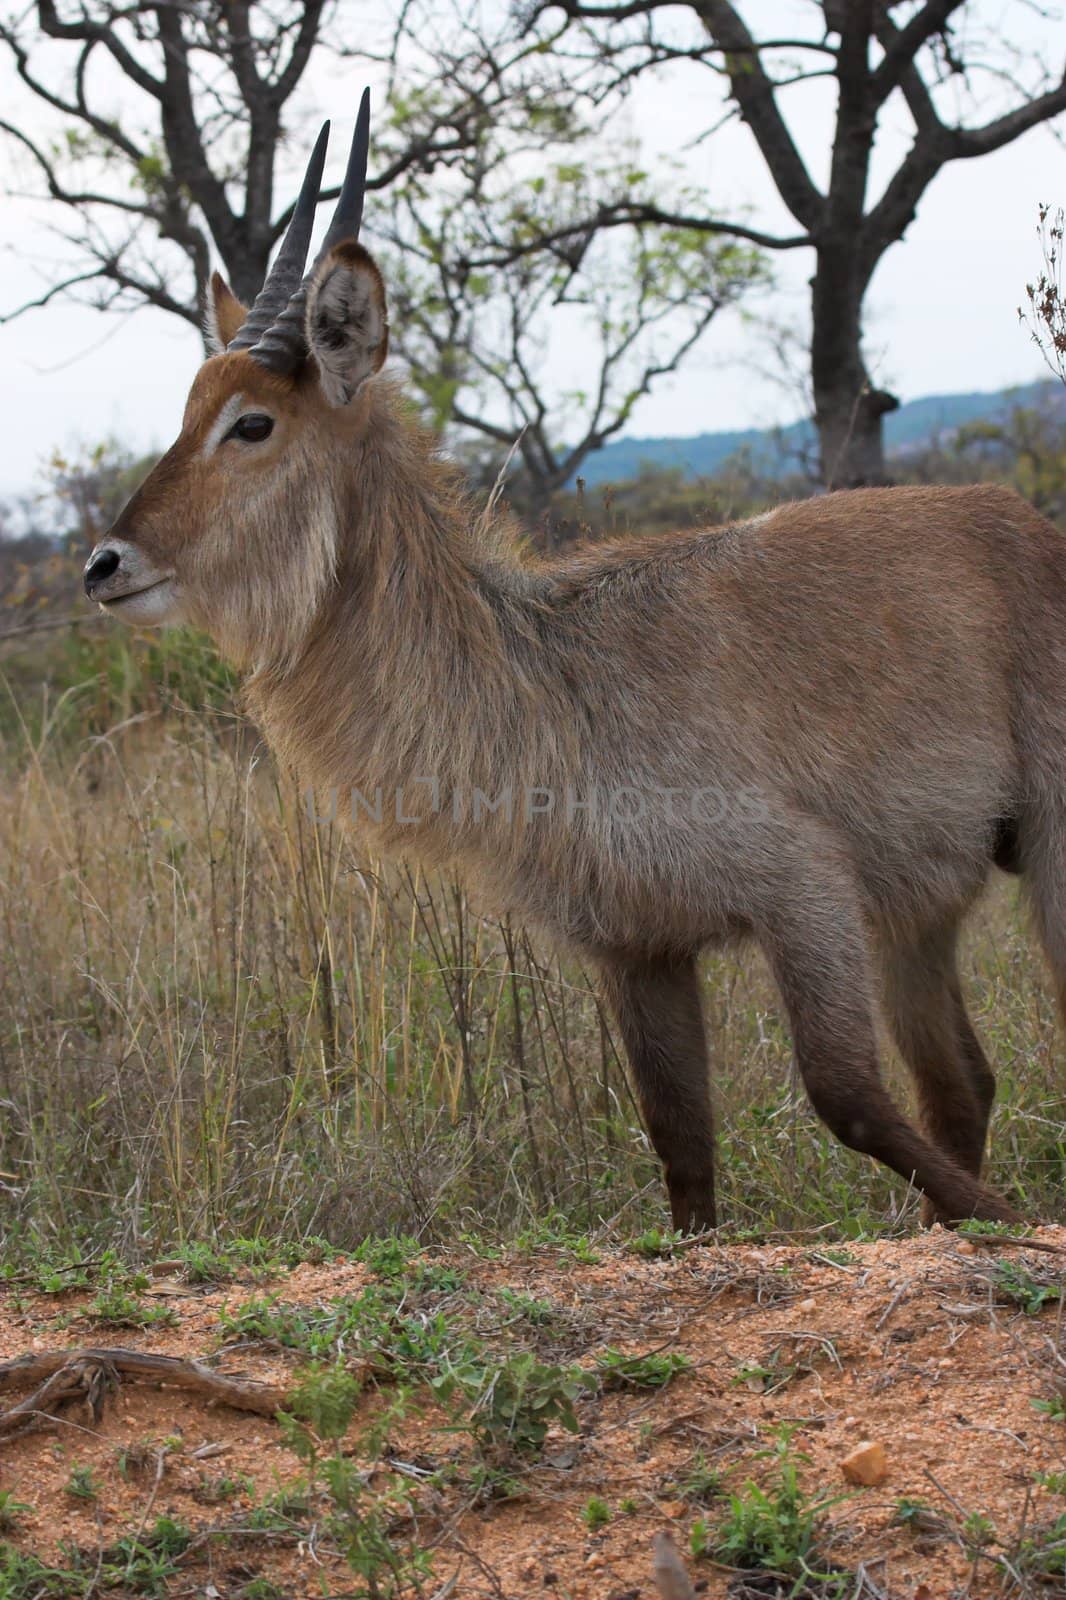 Waterbuck in the Kruger national park, South Africa